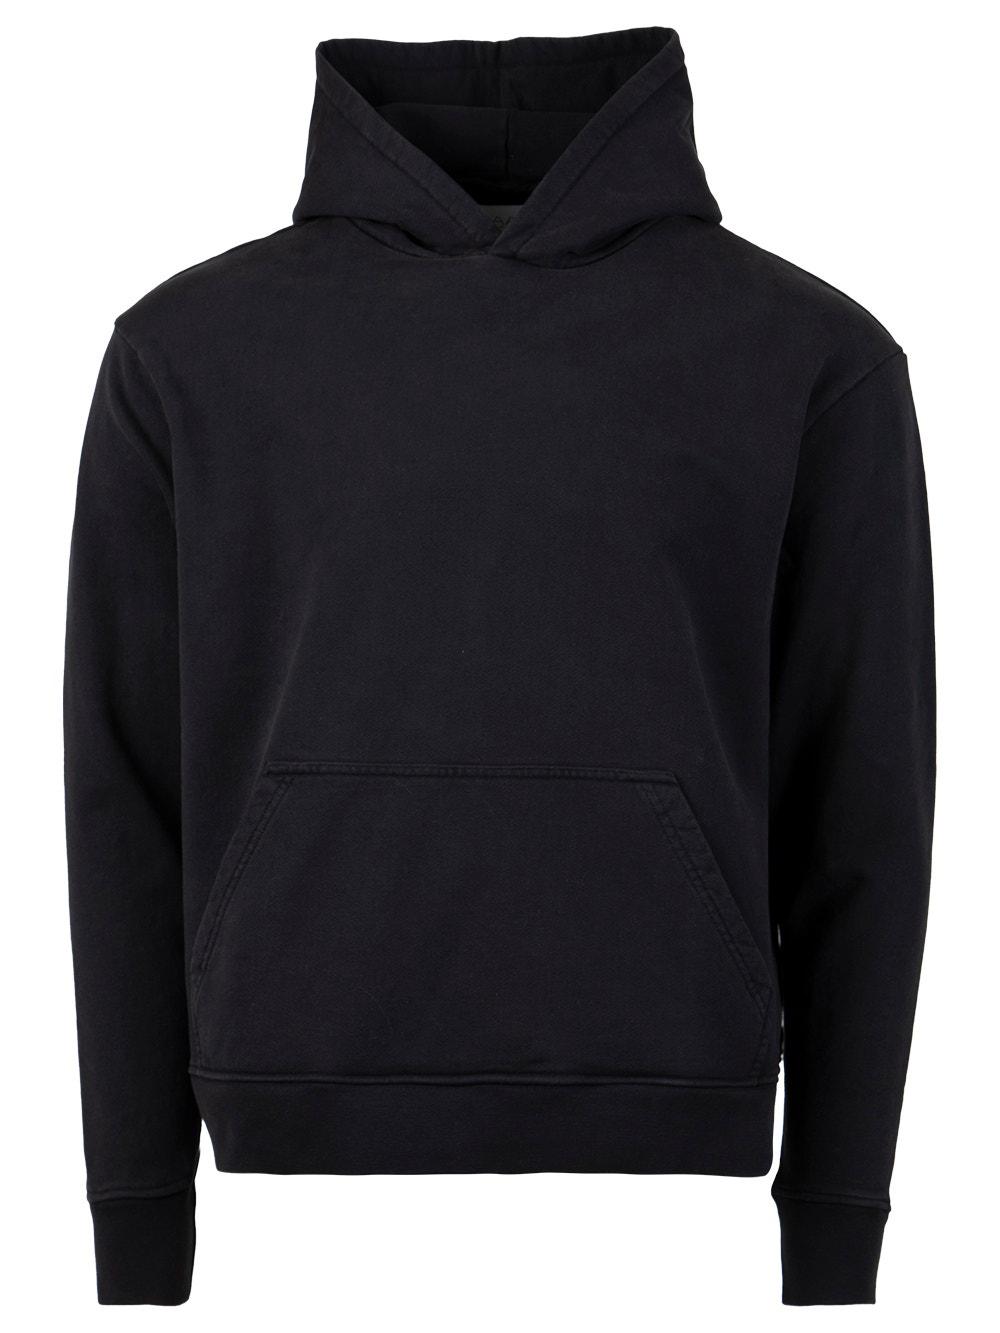 California Hoodie Black by AARON YOUNG